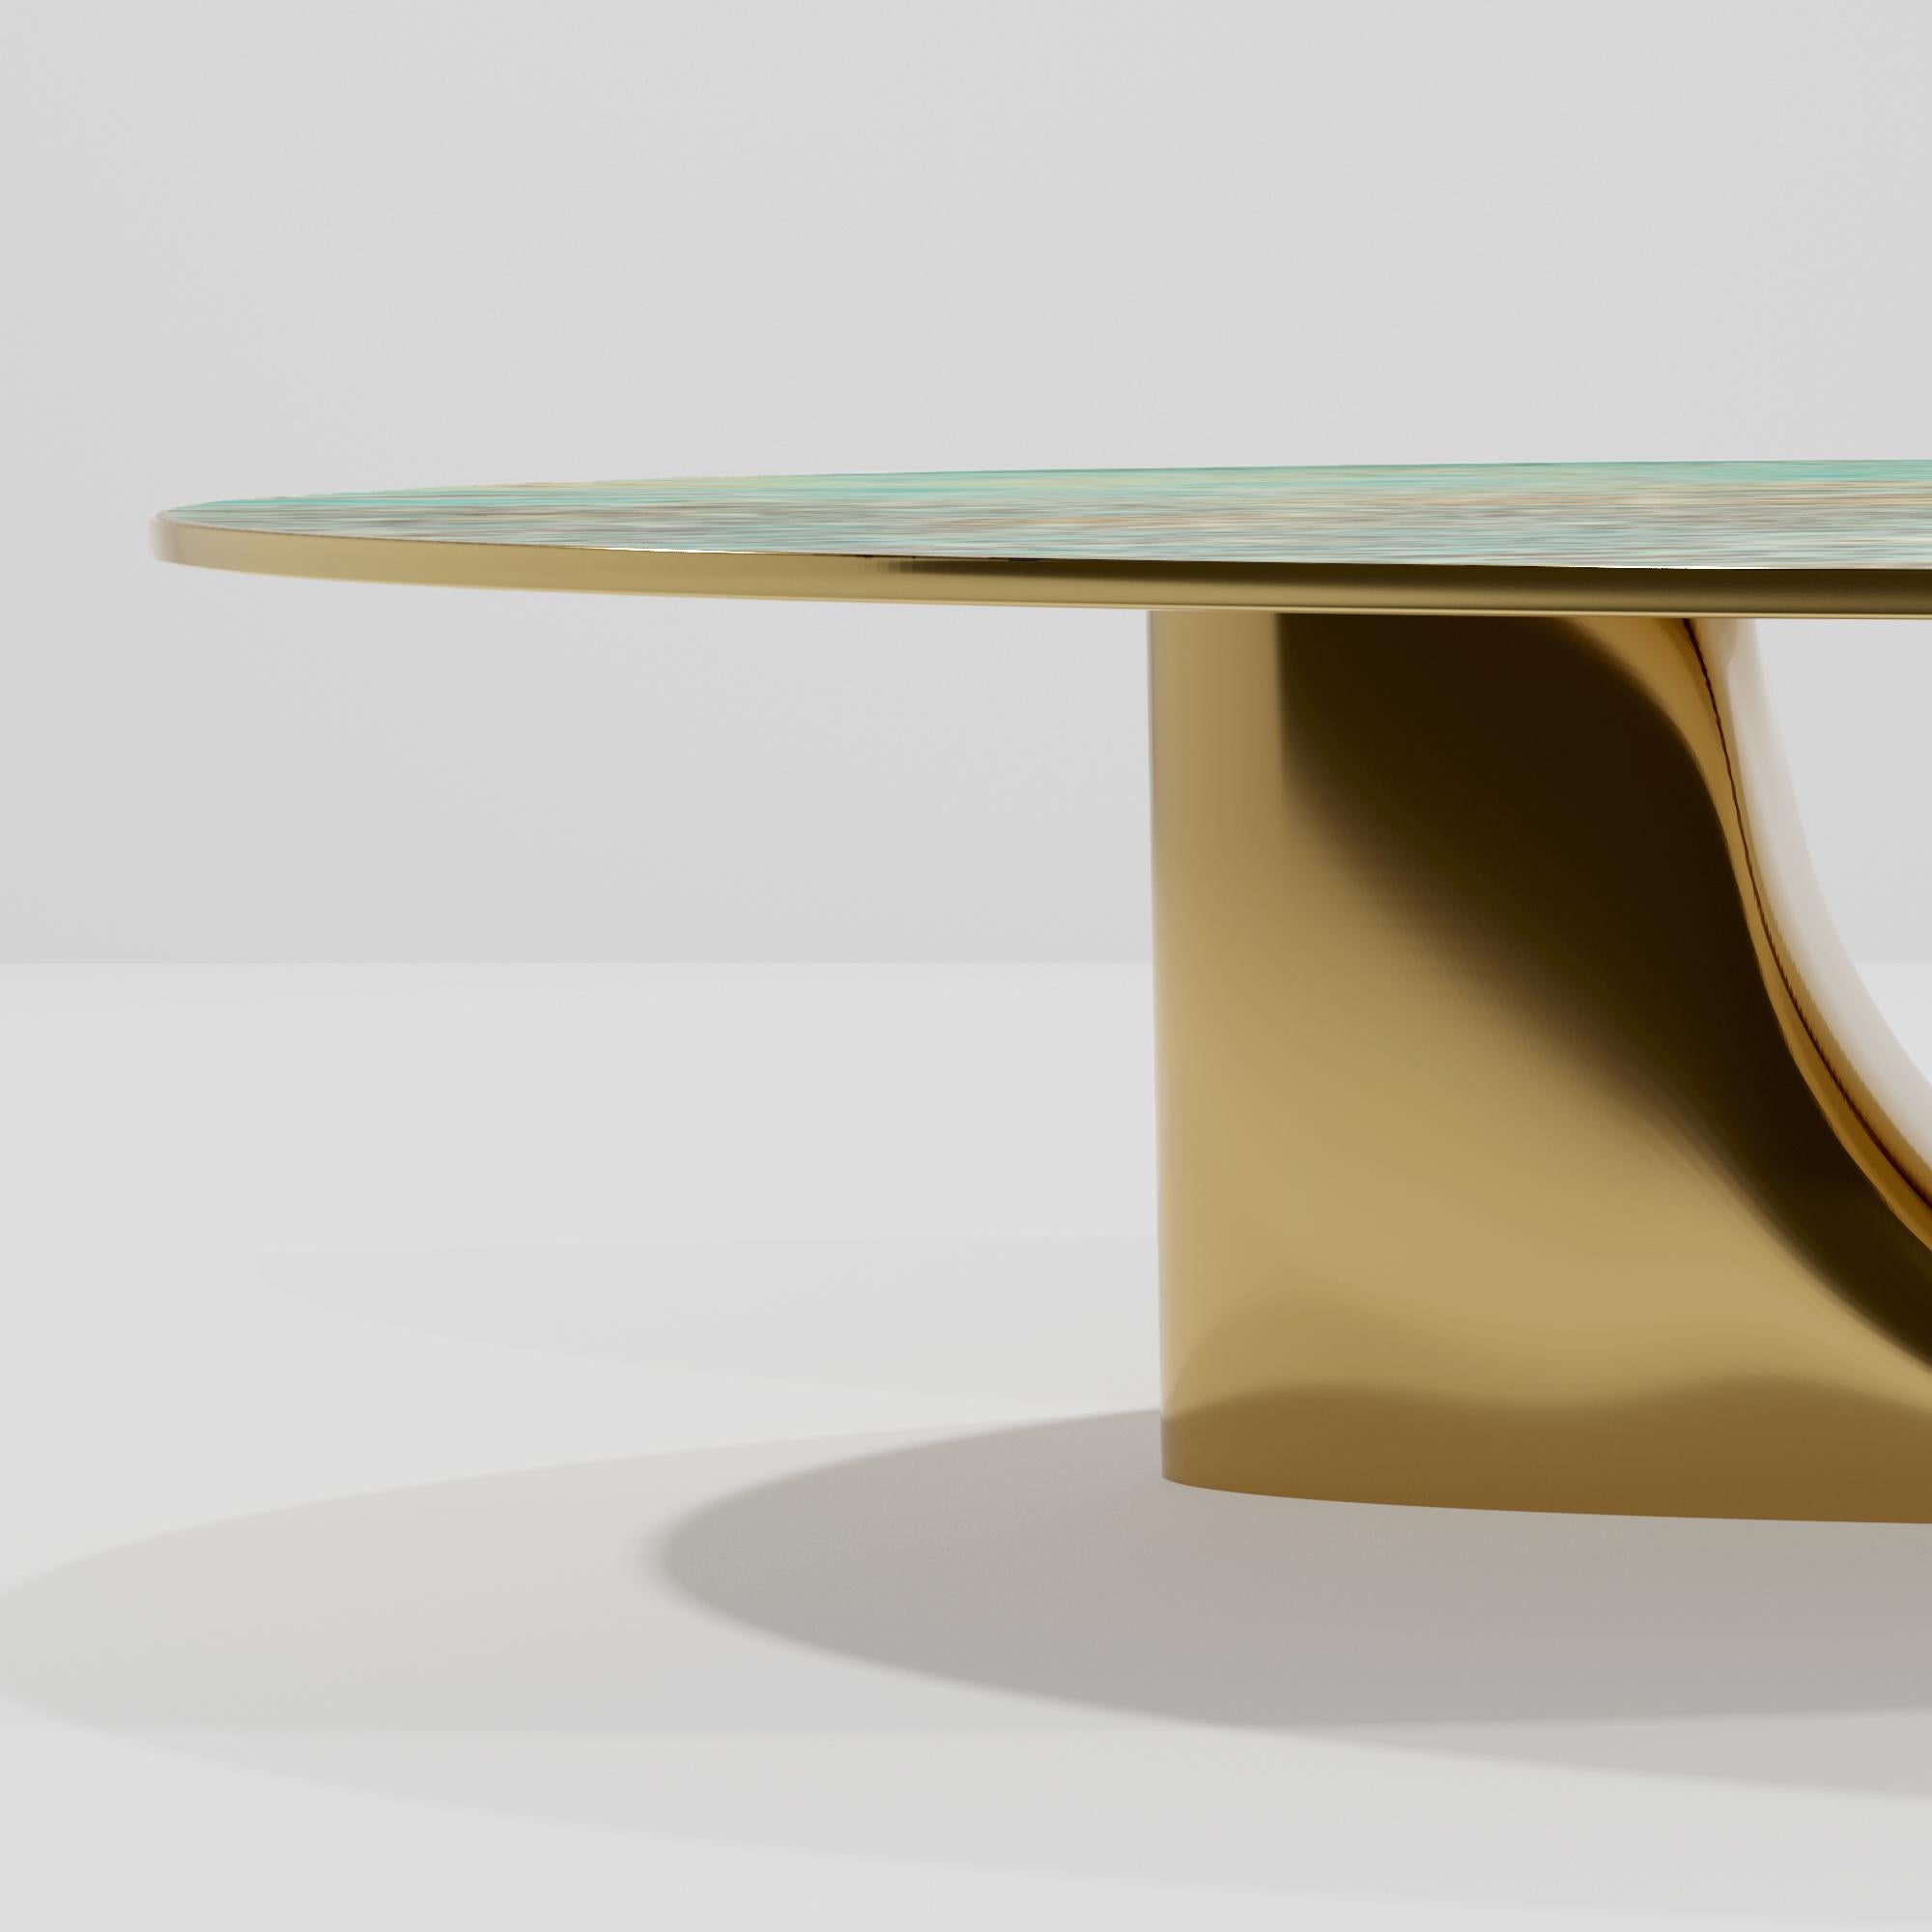 BIS, 21st Century Blue Green Patina Layered Bronzed Dining Table by Studio SORS 2